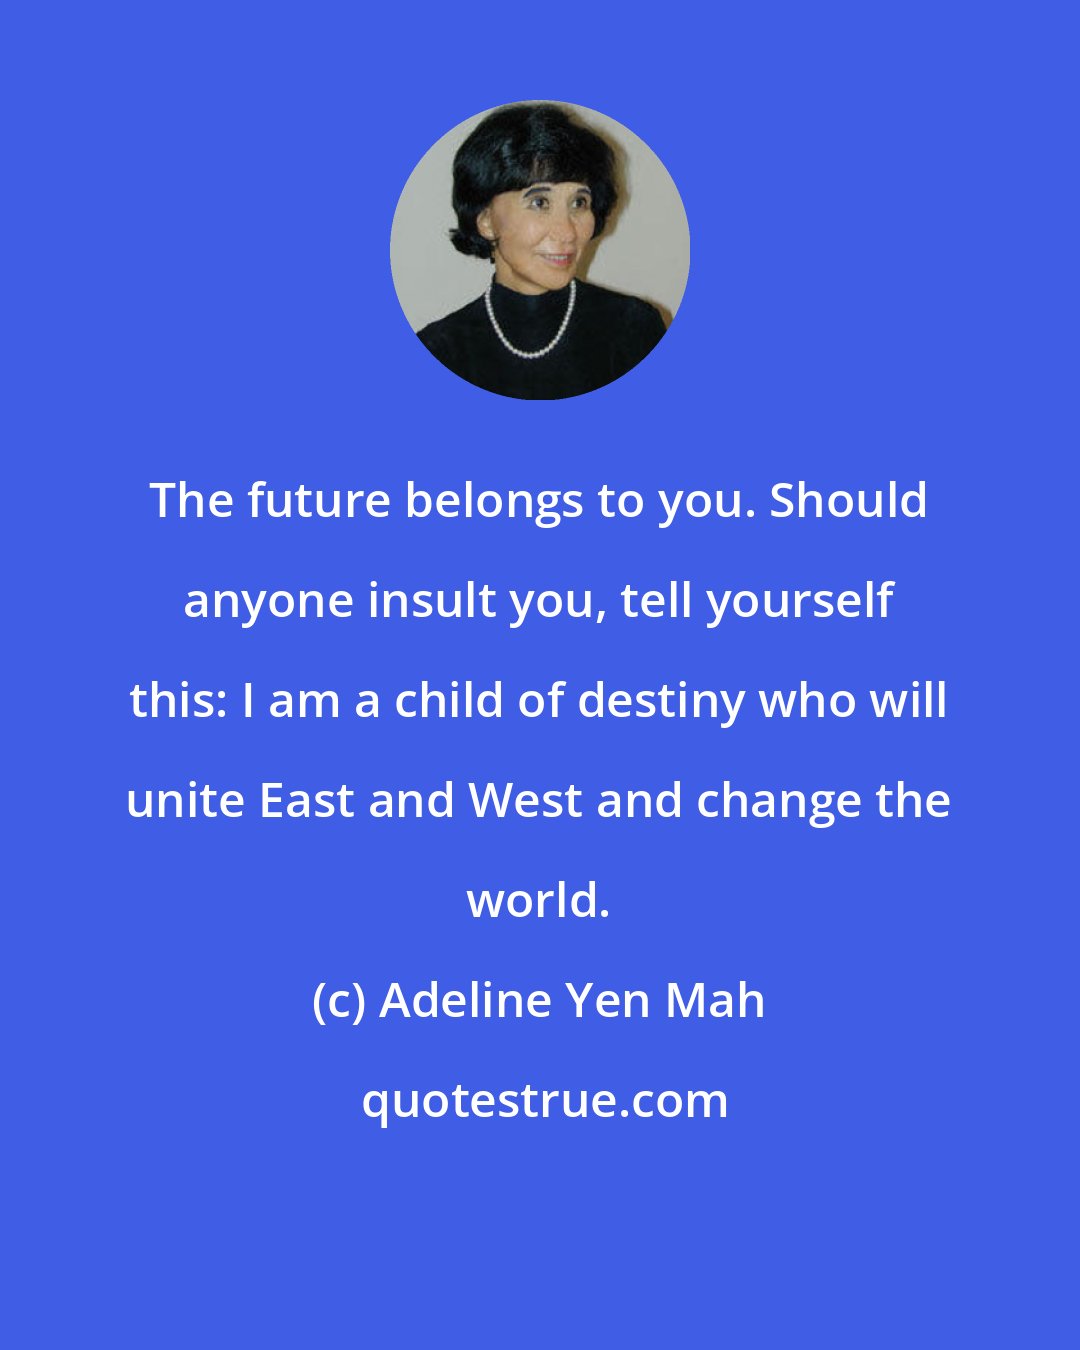 Adeline Yen Mah: The future belongs to you. Should anyone insult you, tell yourself this: I am a child of destiny who will unite East and West and change the world.